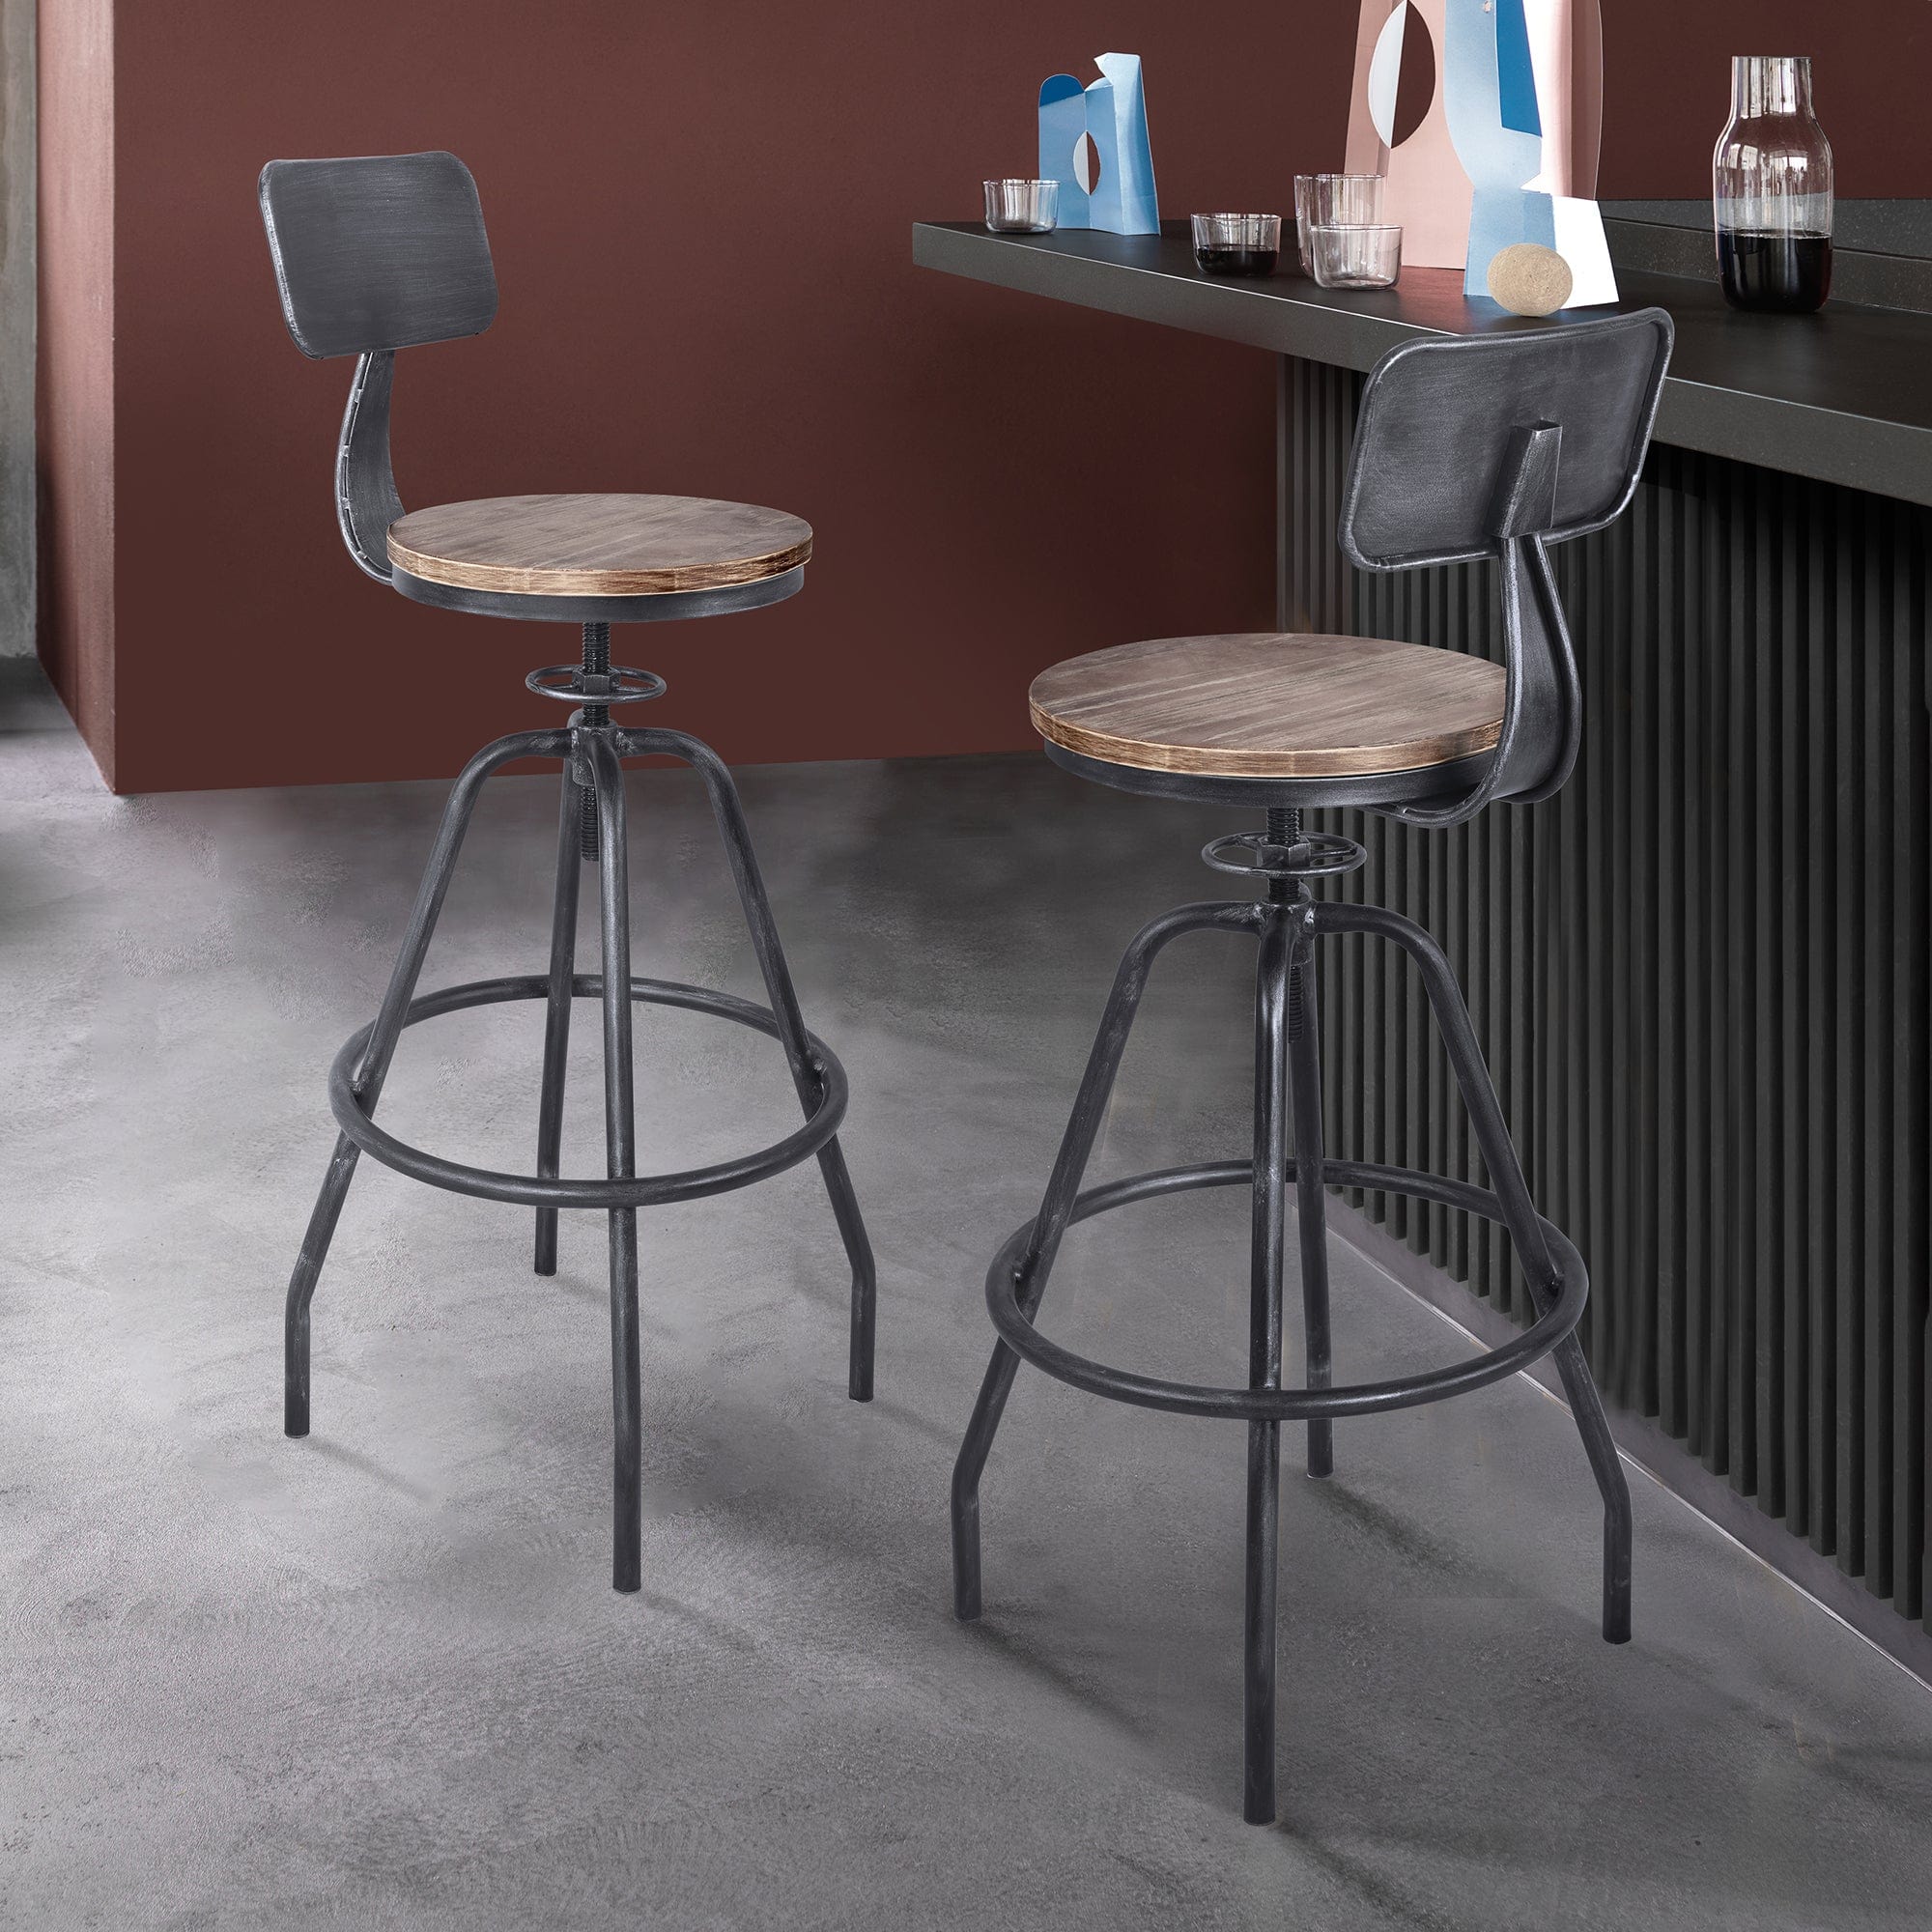 Armen Living Barstool Armen Living - Perlo Industrial Adjustable Barstool in Industrial Gray and Pine Wood | LCPESTSBPI